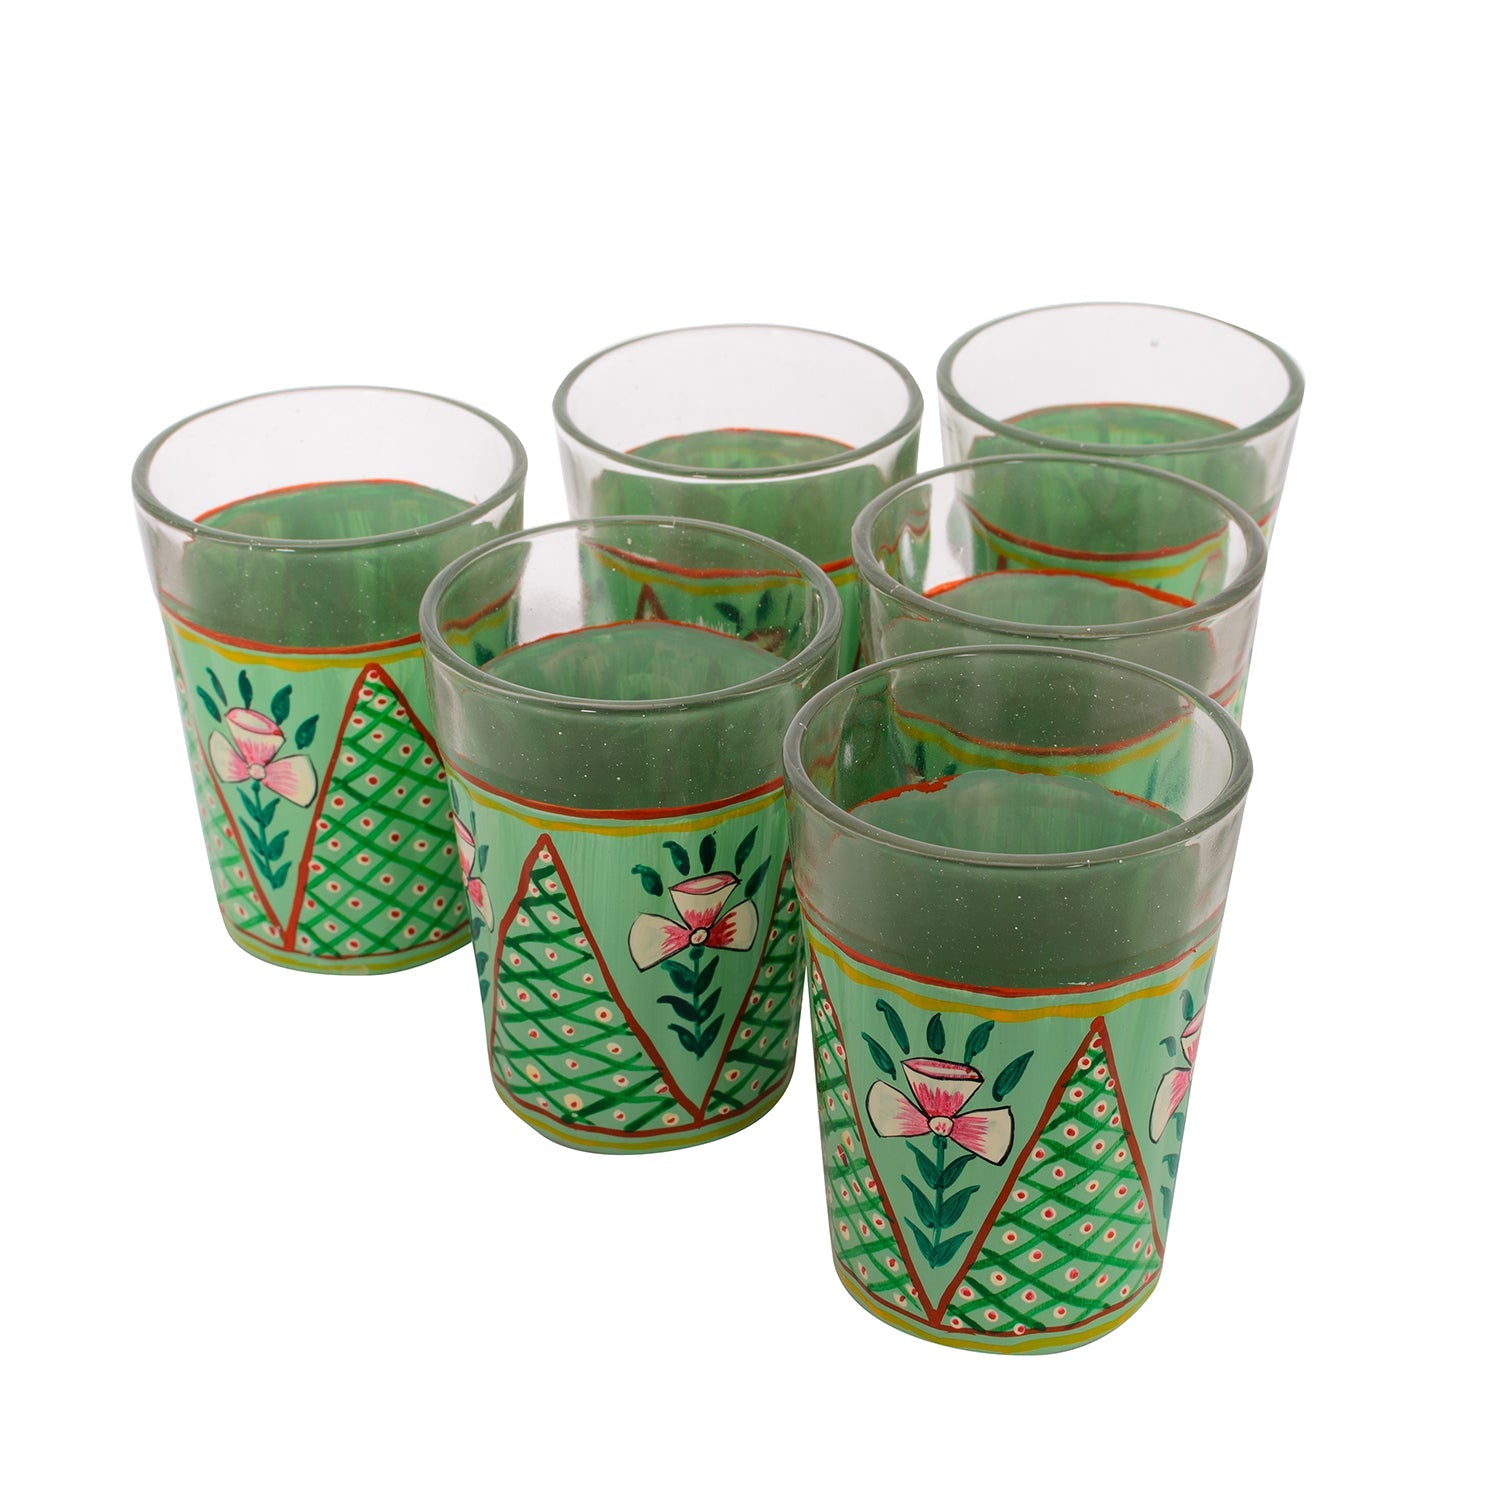 Hand Painted  Tea Glass set of 6 : Green valley